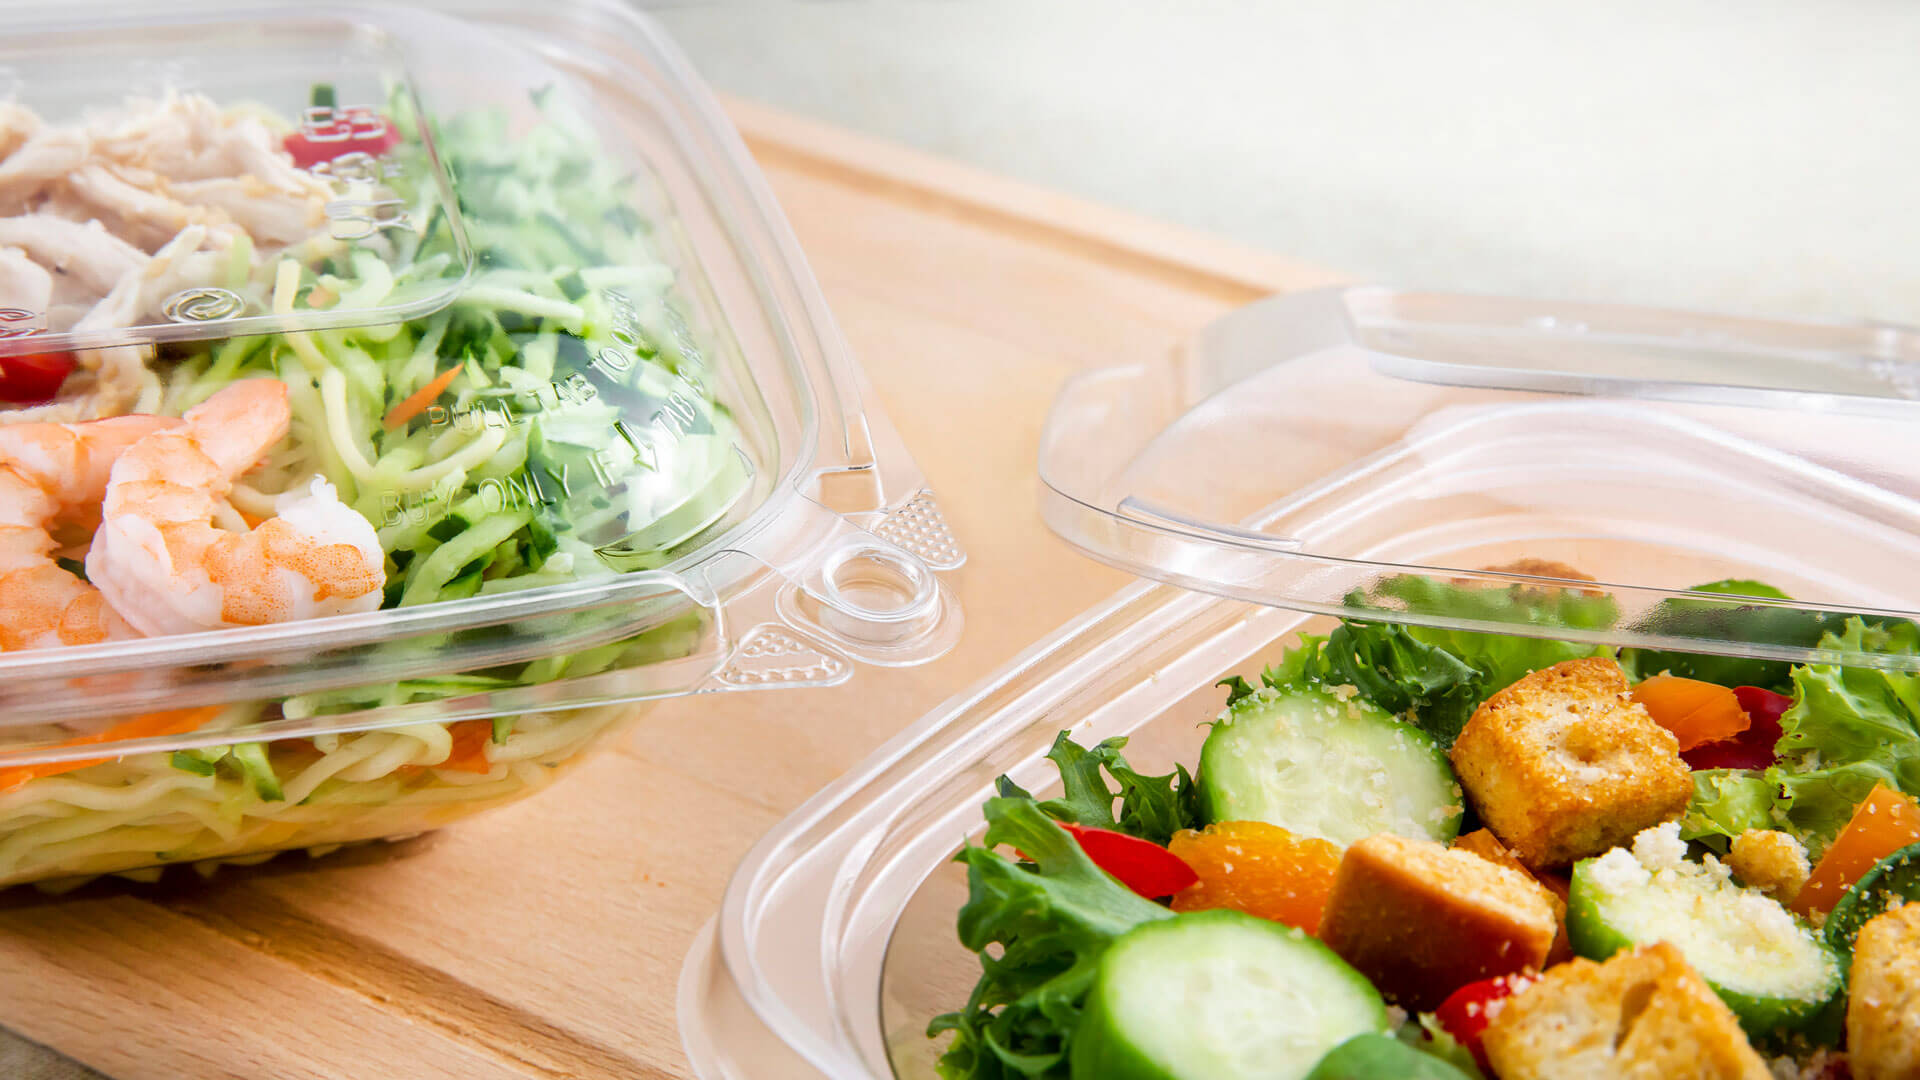 Will RPET Plastic Packaging Enable Supermarkets To Respond To New Legislation?